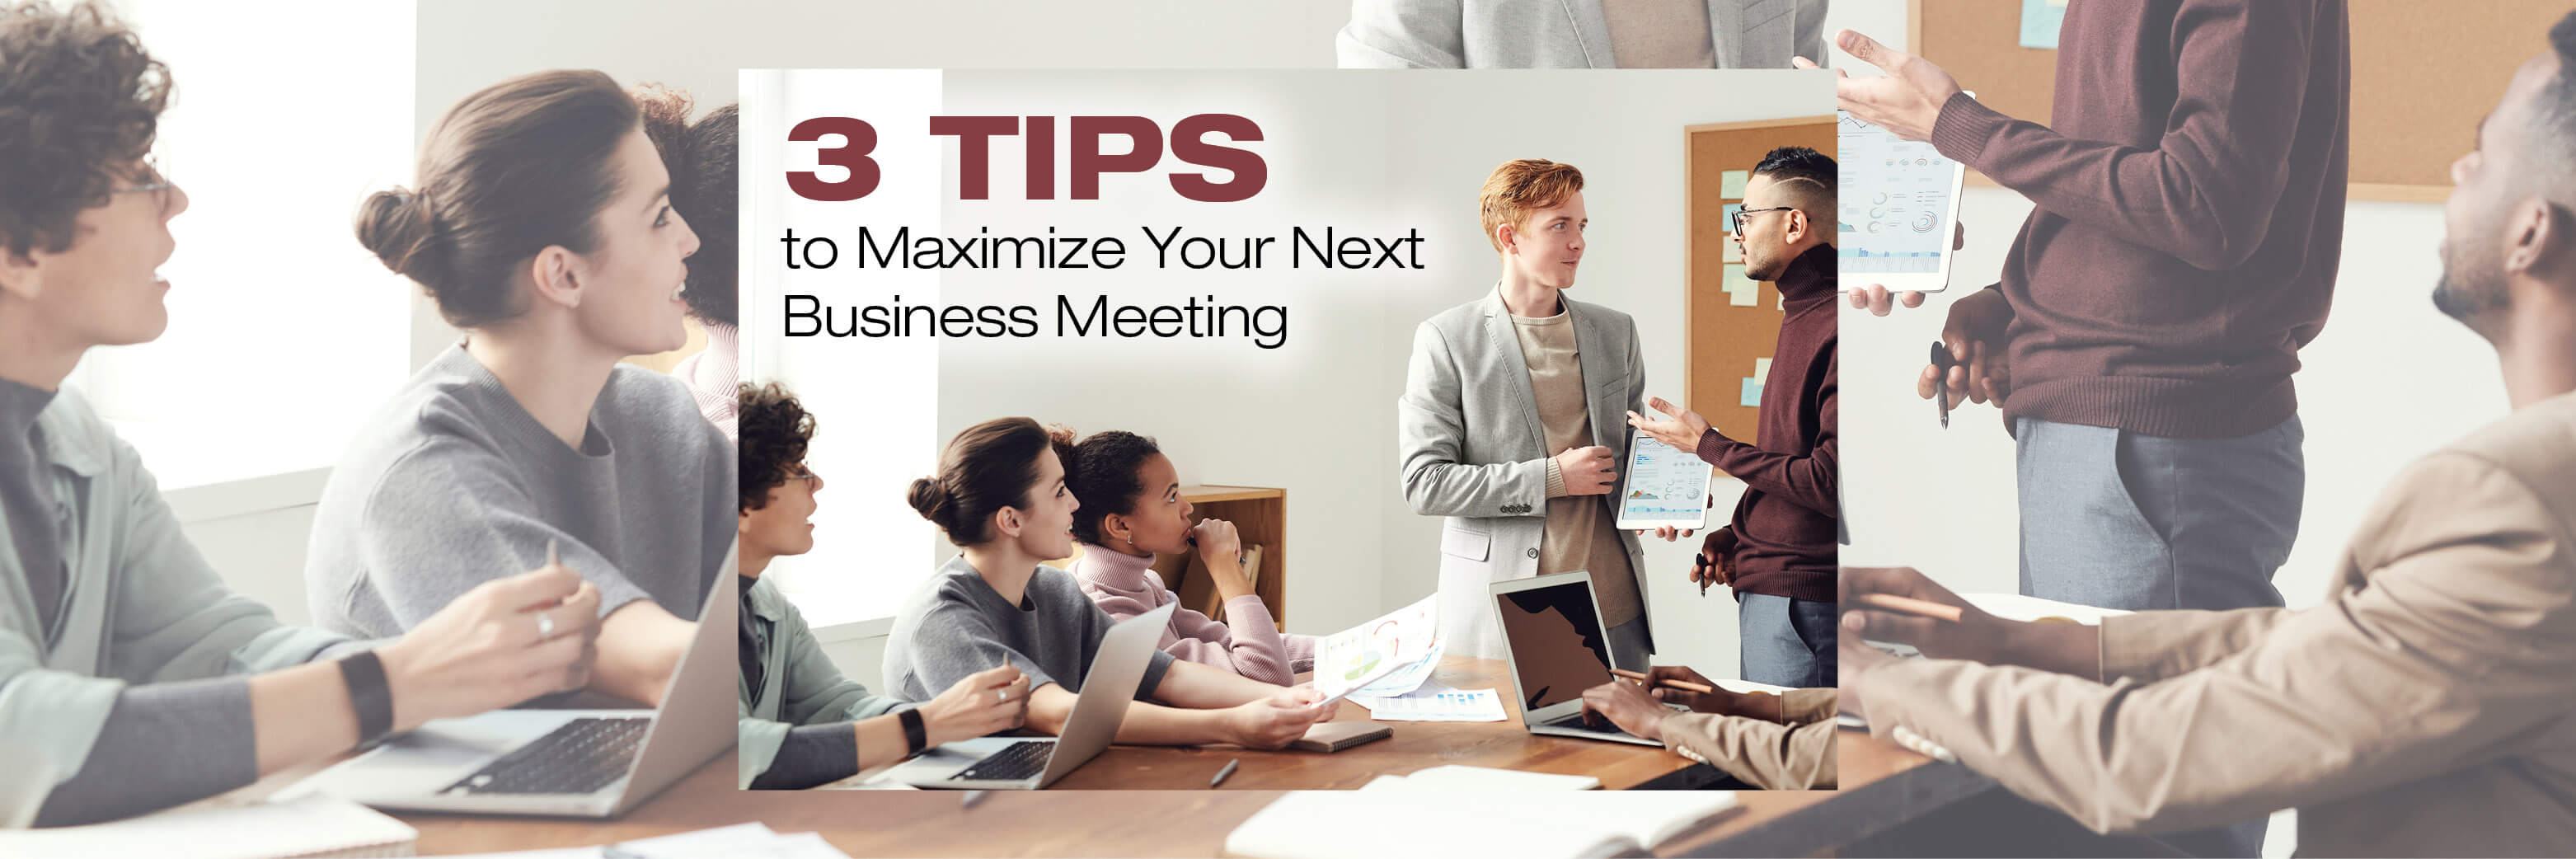 Three Tips to Maximize Your Next Business Meeting